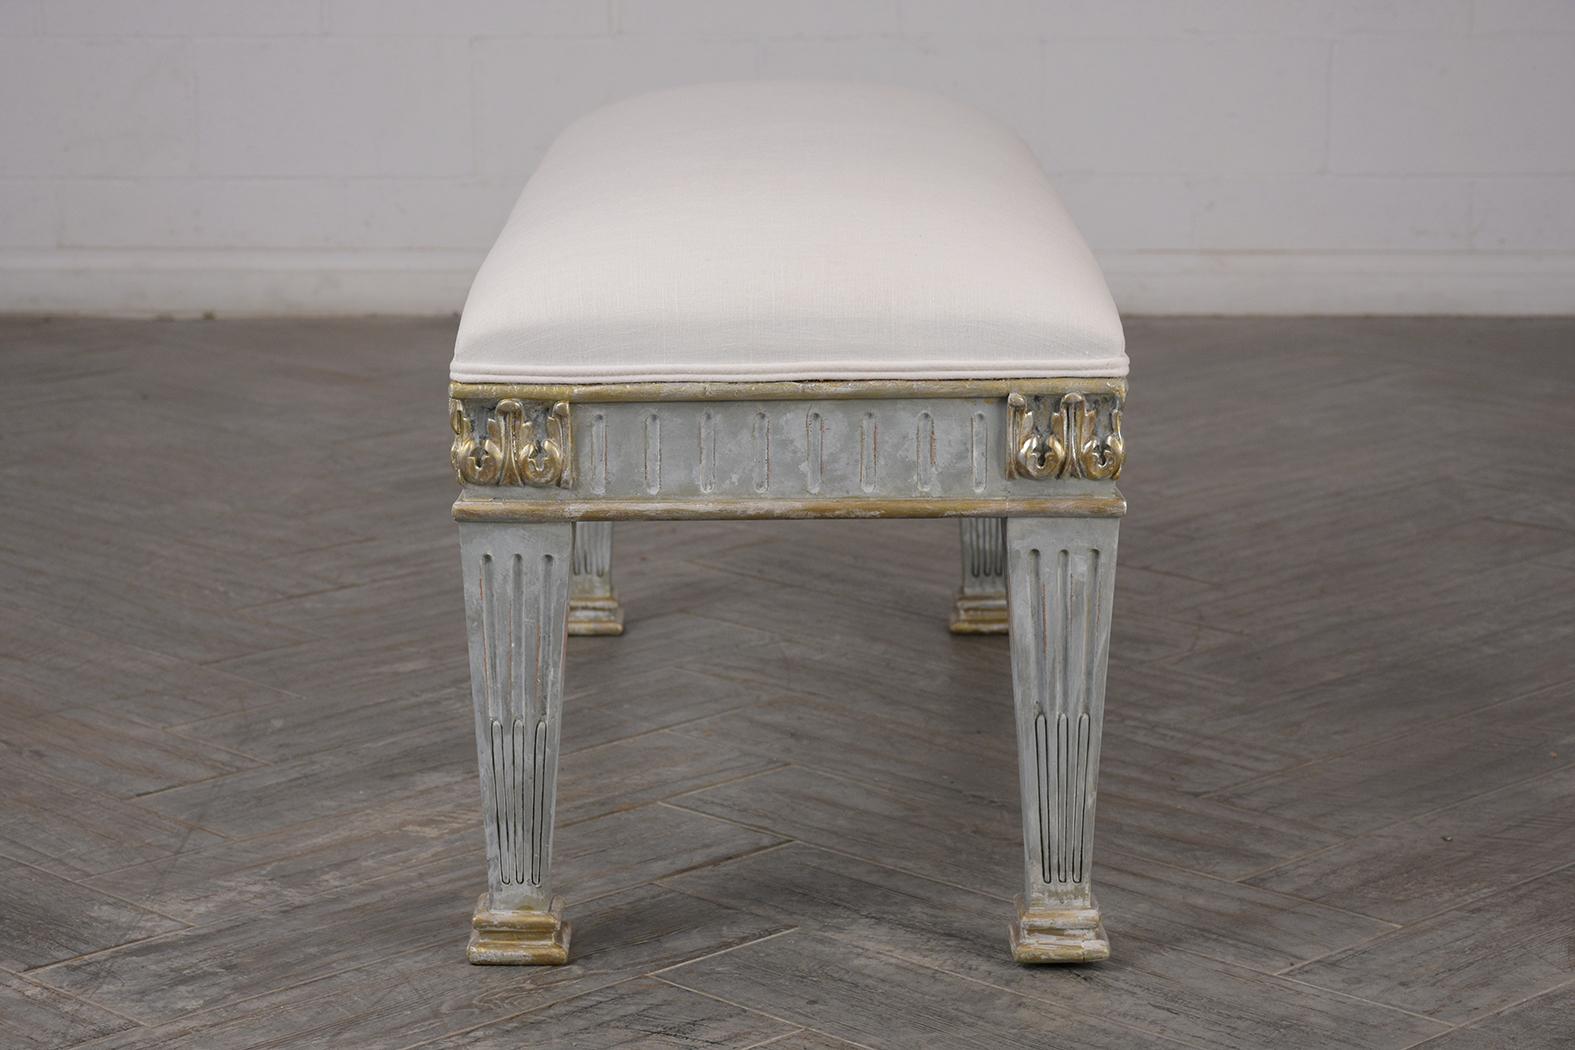 This 1900s Antique French Empire-style bench features a carved wood frame finished in a gray and white color combination with silver accents. The carved frame features architectural elements such as a frieze border and fluted legs with pedestal